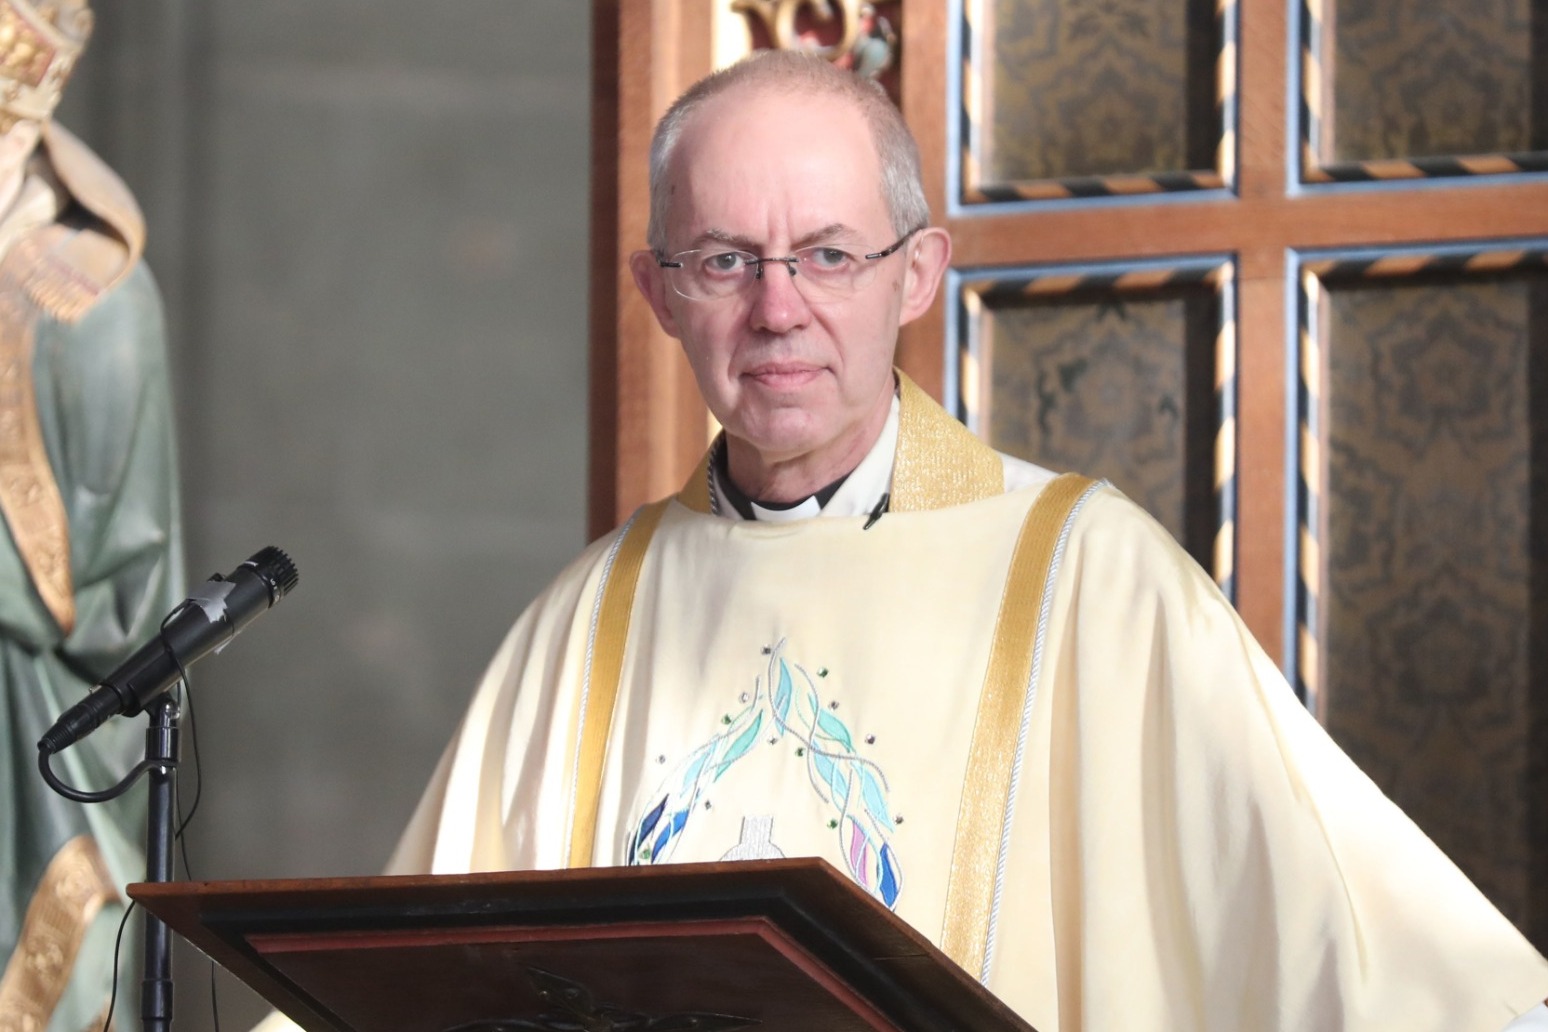 Archbishop calls for a ‘better future for all’ in Easter message 